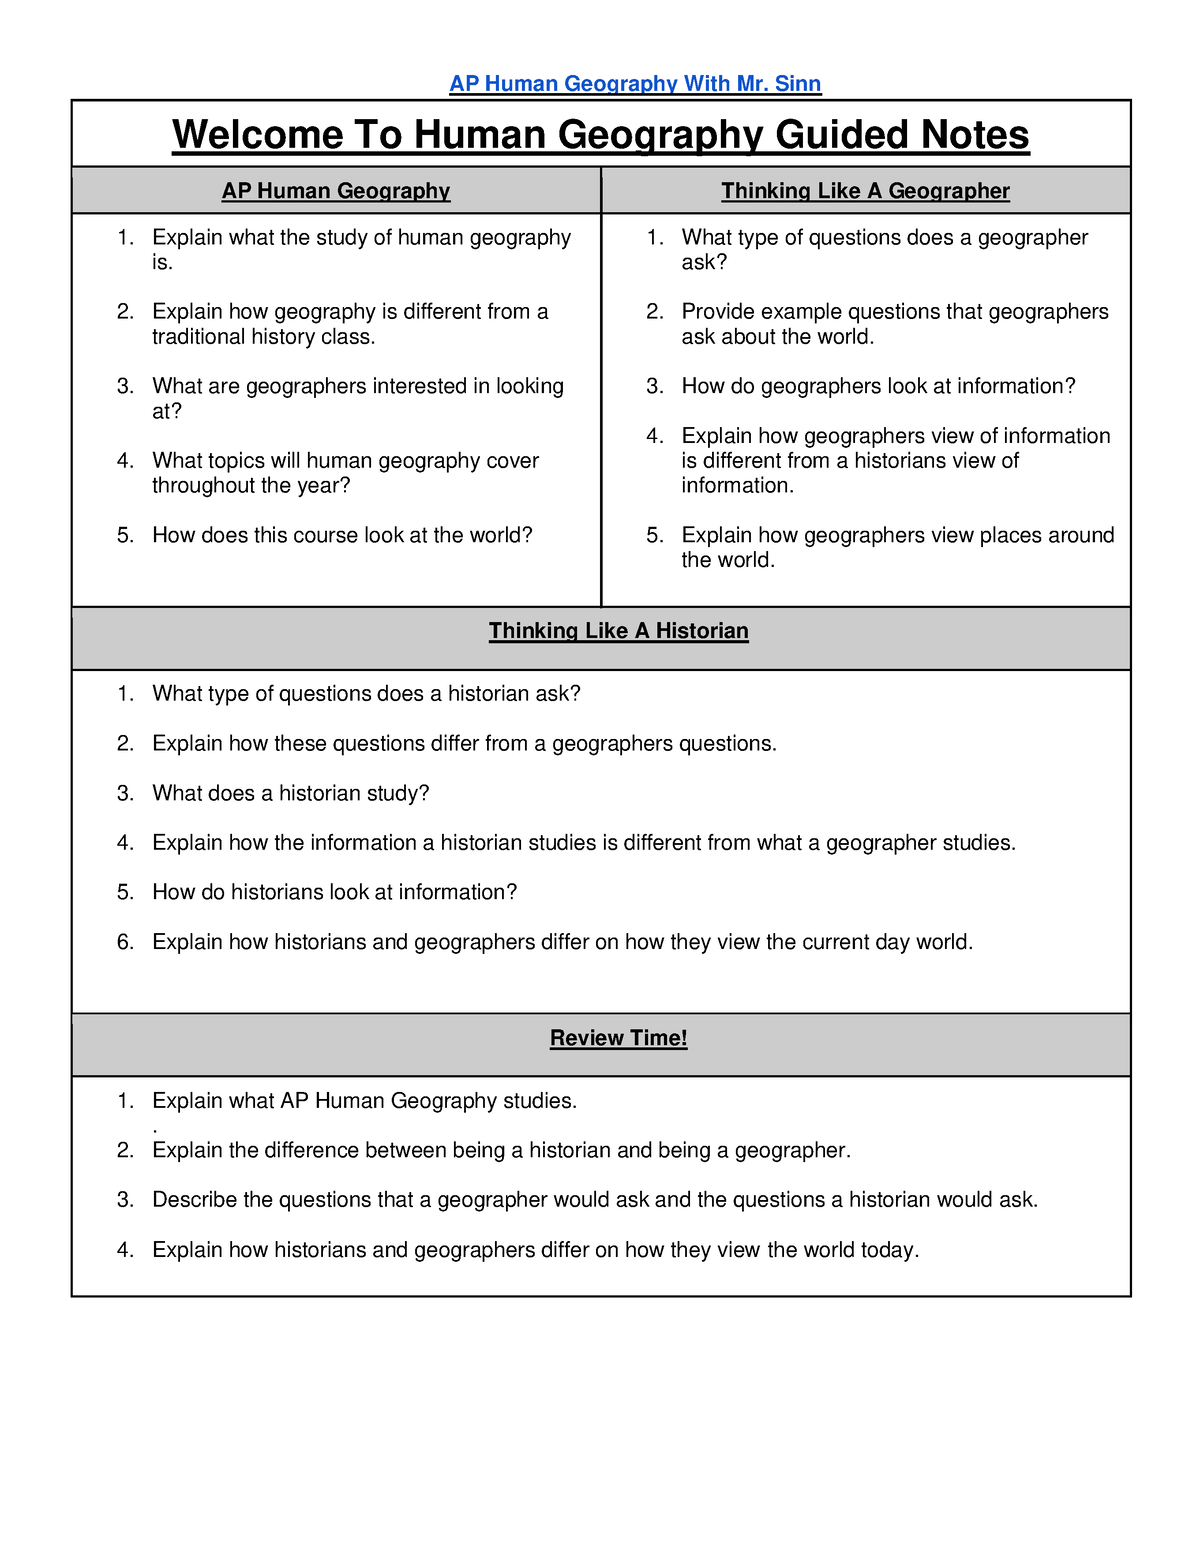 to Human Geography Guided Notes AP Human Geography With Mr